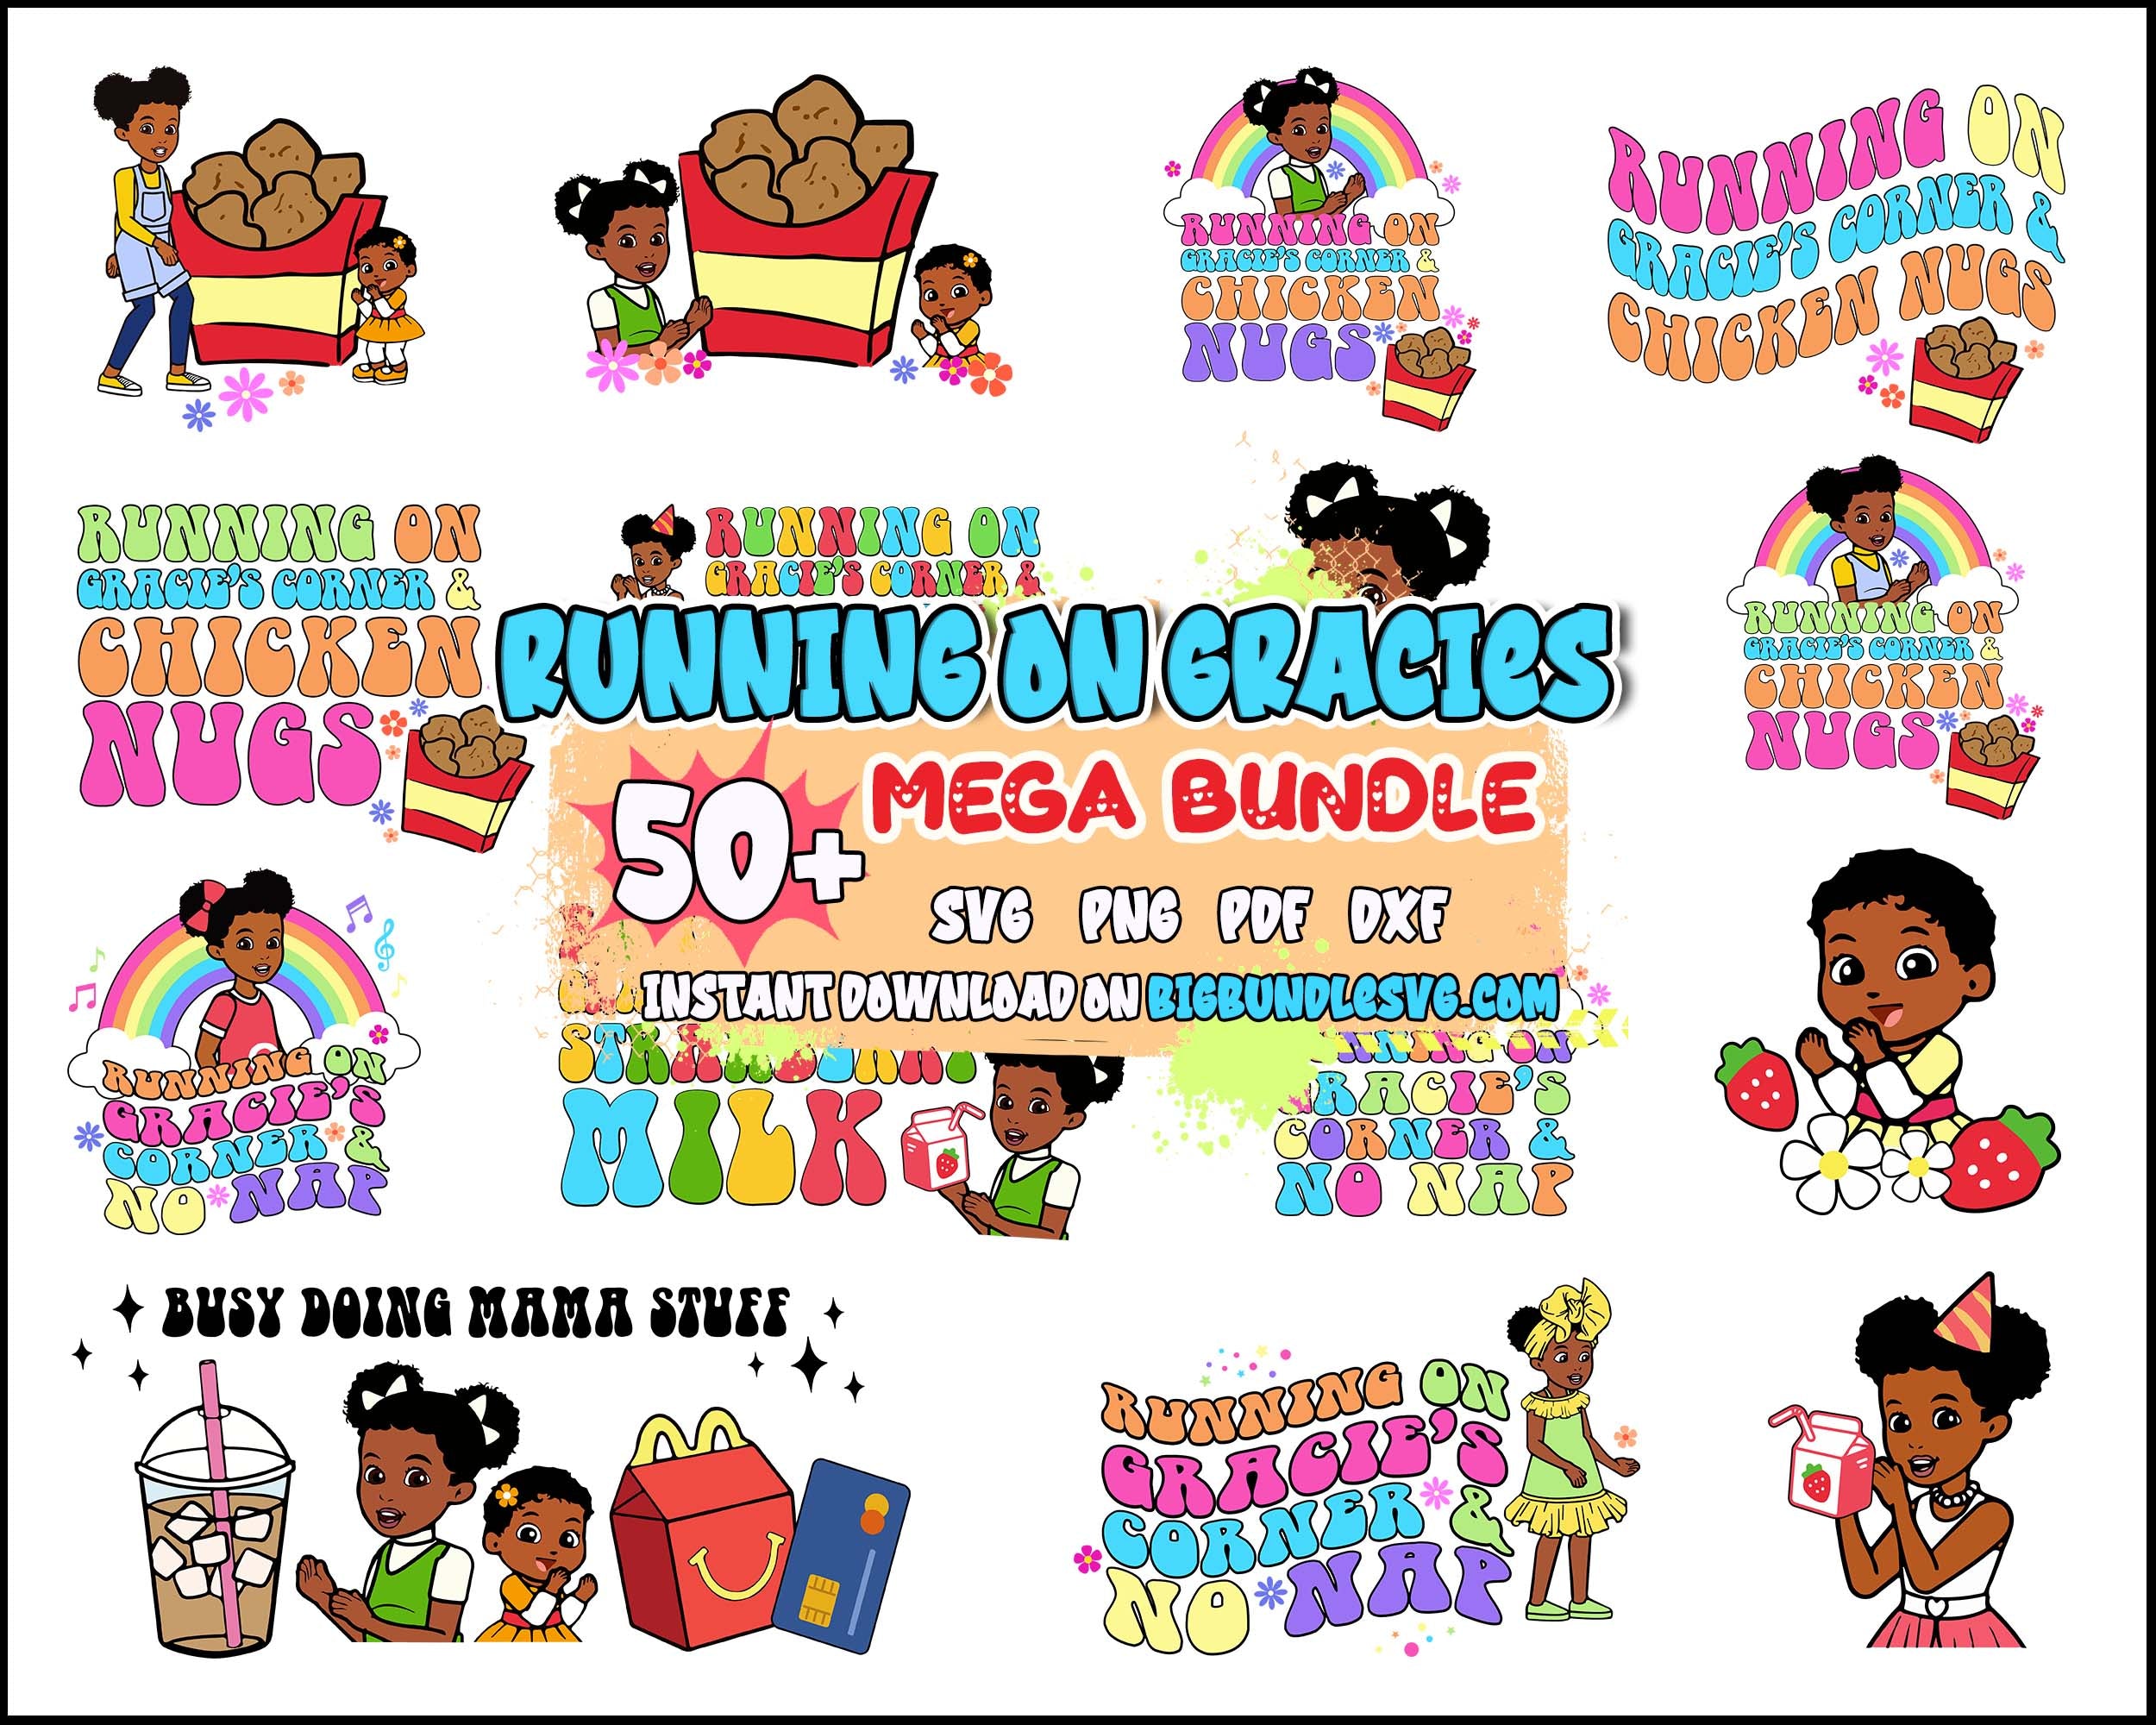 50+ Running on Gracies and Iced Coffee download, svg png eps dxf